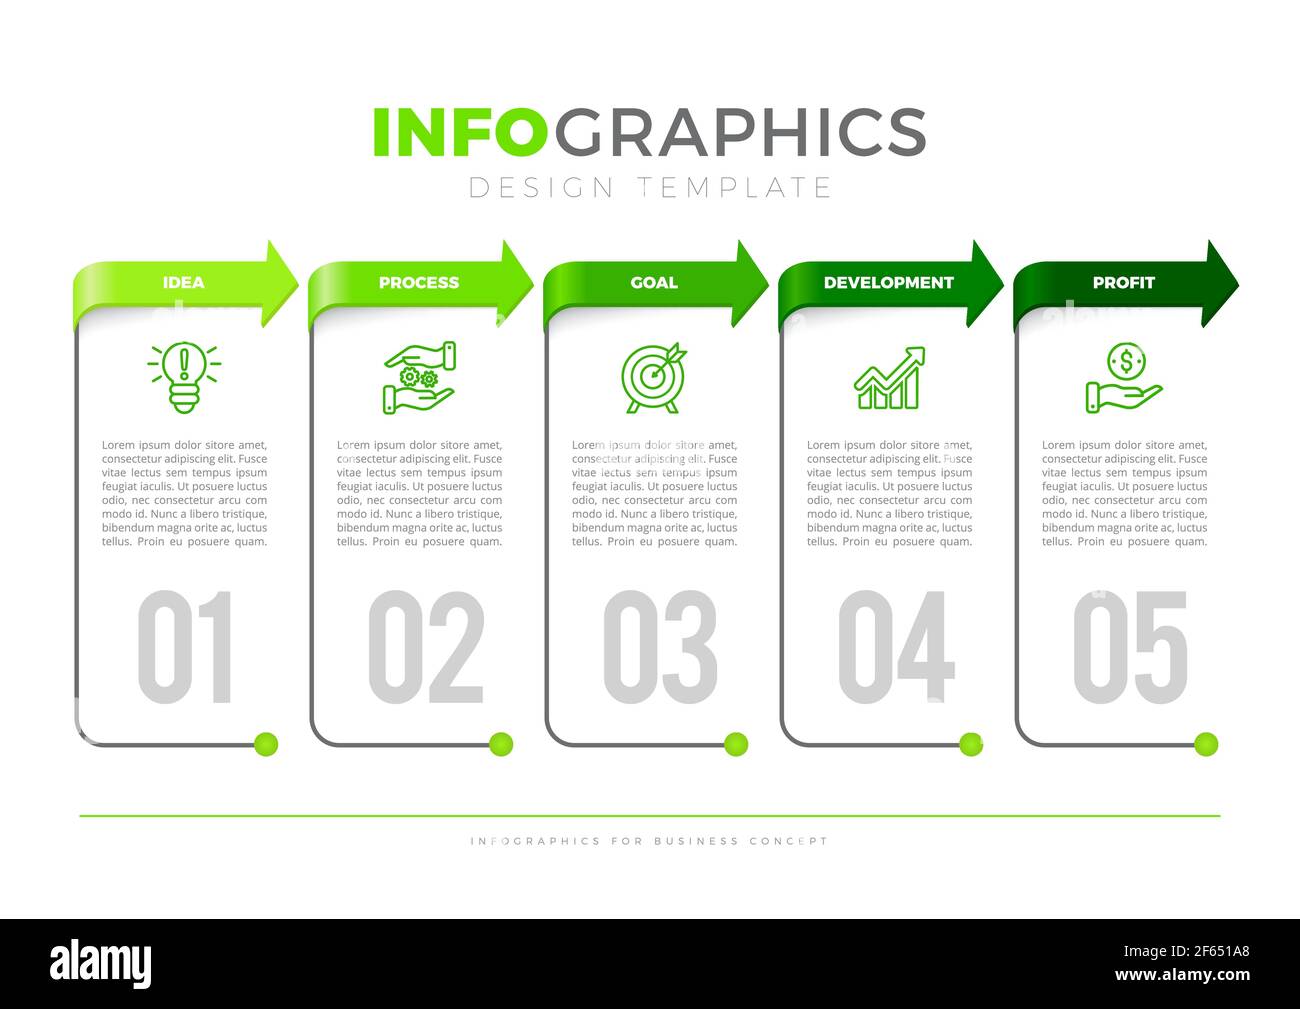 Infographic design with 5 options or steps. Infographics for business concept. Stock Vector